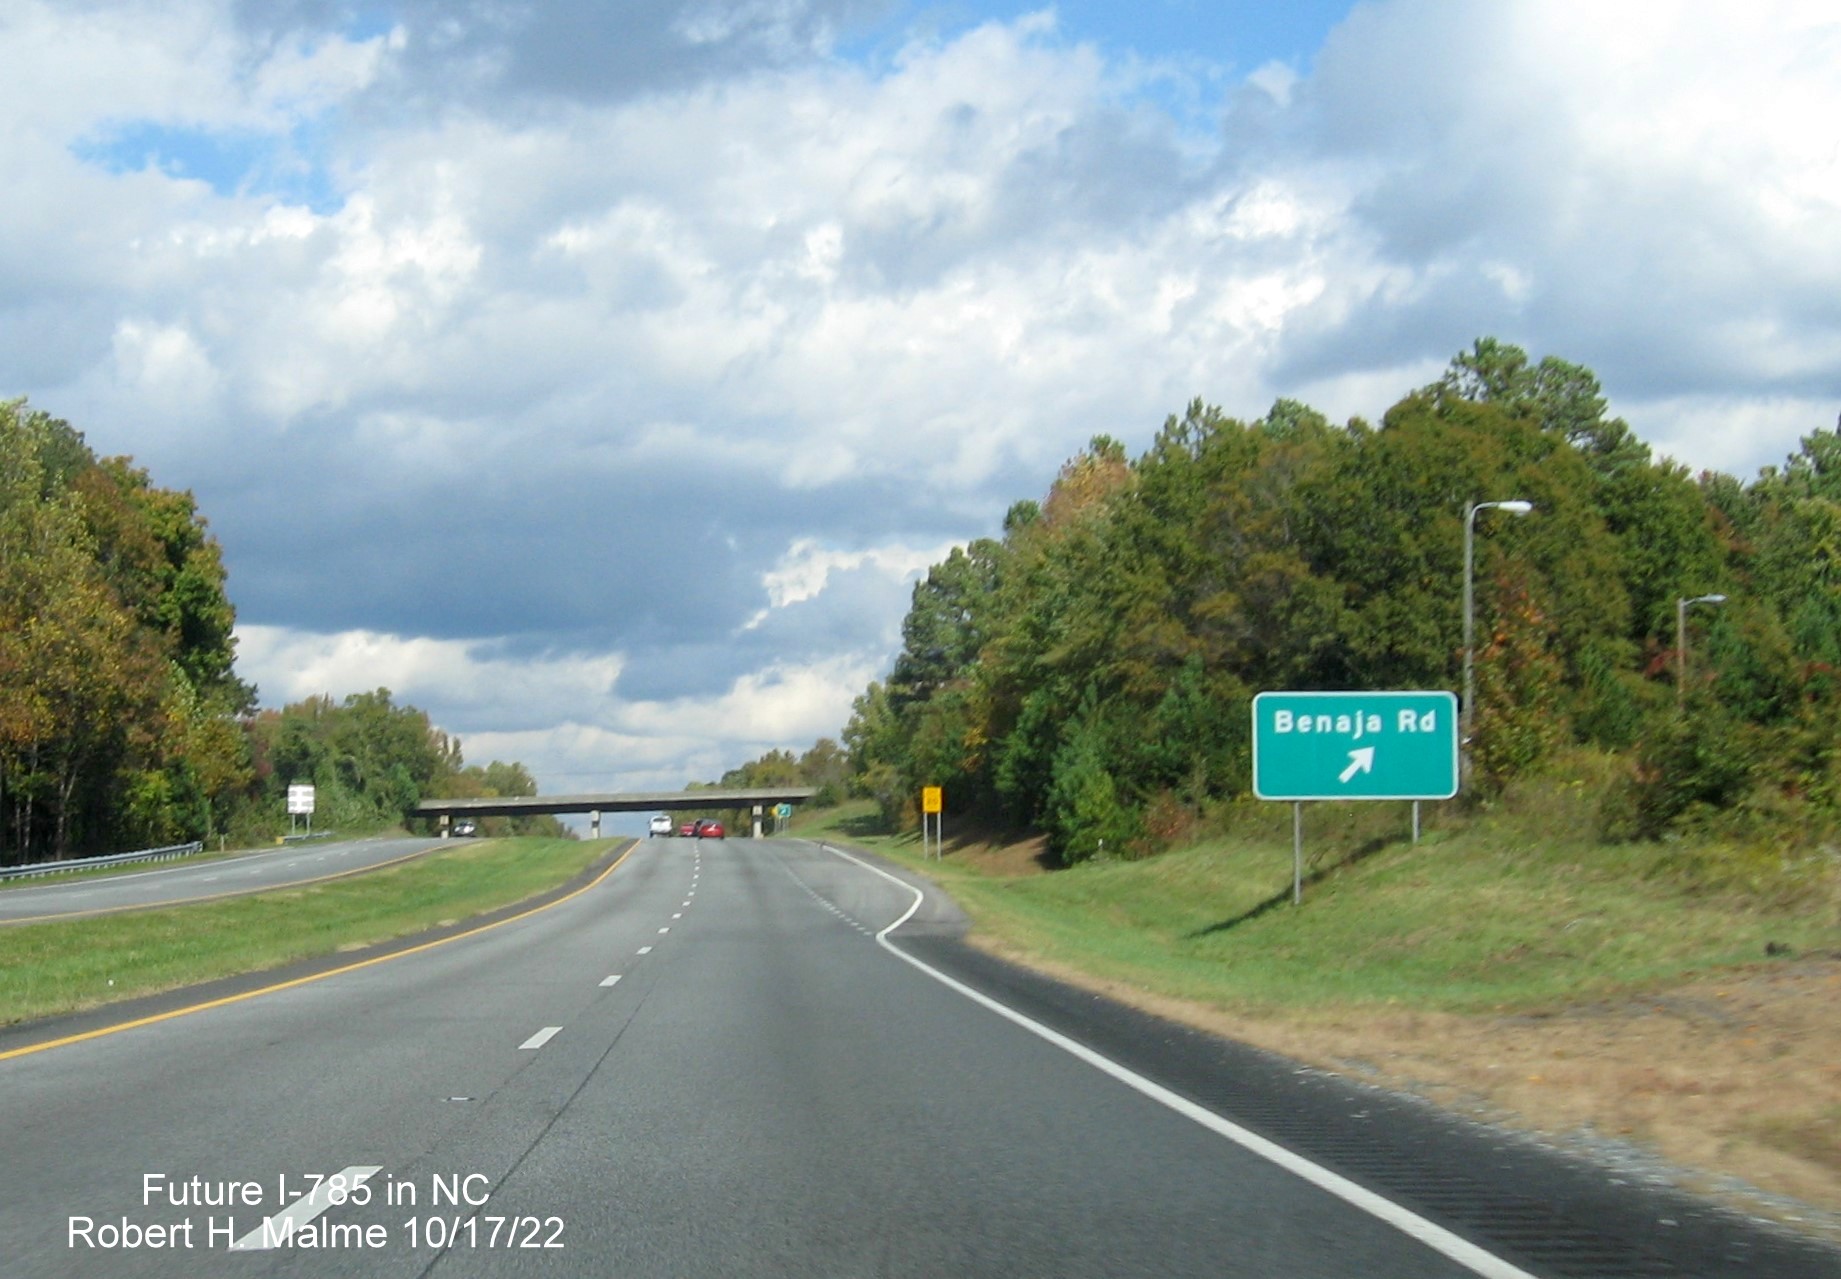 Image of ground mounted ramp sign for Benaja Road exit on US 29 North in Guilford County, October 2022